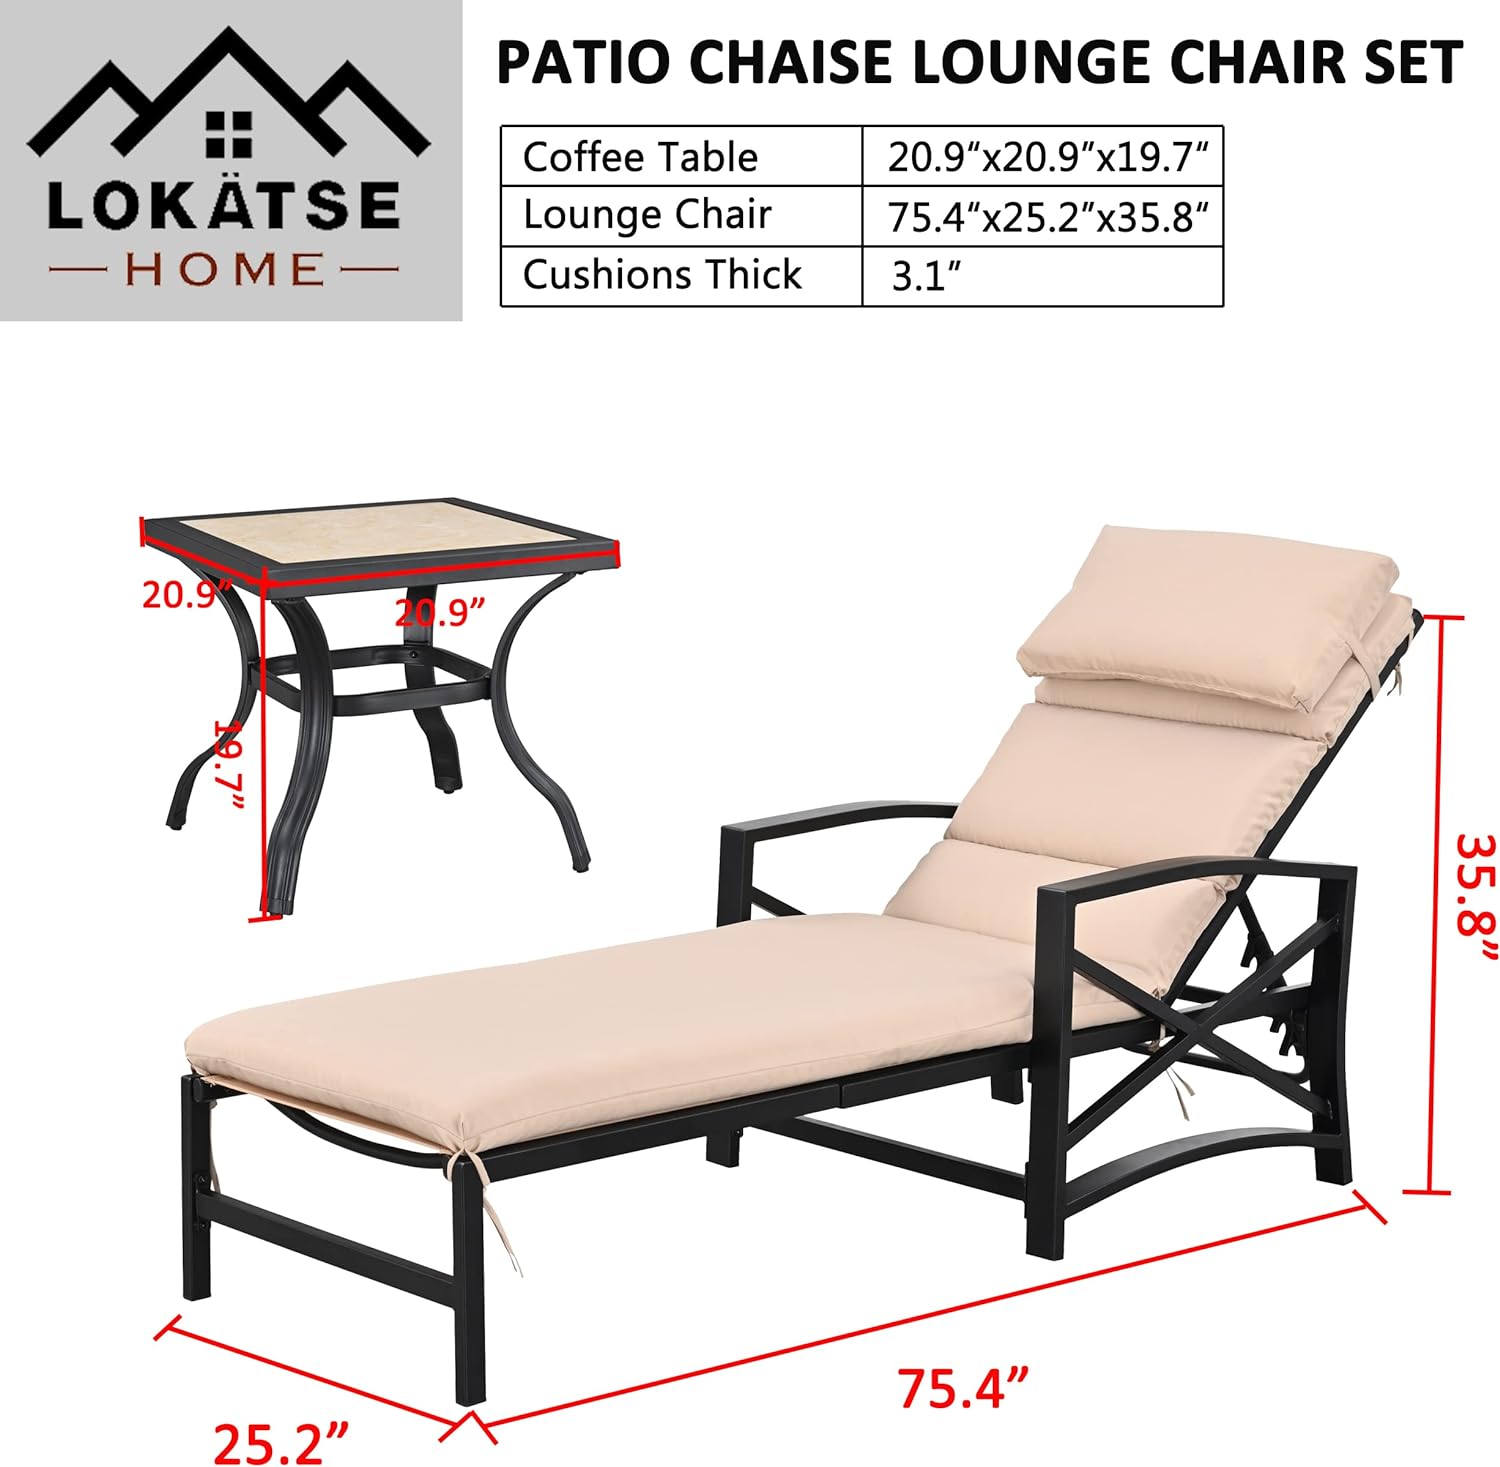 Festival Depot 3 Pieces Patio Outdoor Chaise Lounge Chairs with Cushions Set with Coffee Table Premium Fabric Metal Frame Furniture Garden Bistro Soft Backrest (Khaki)